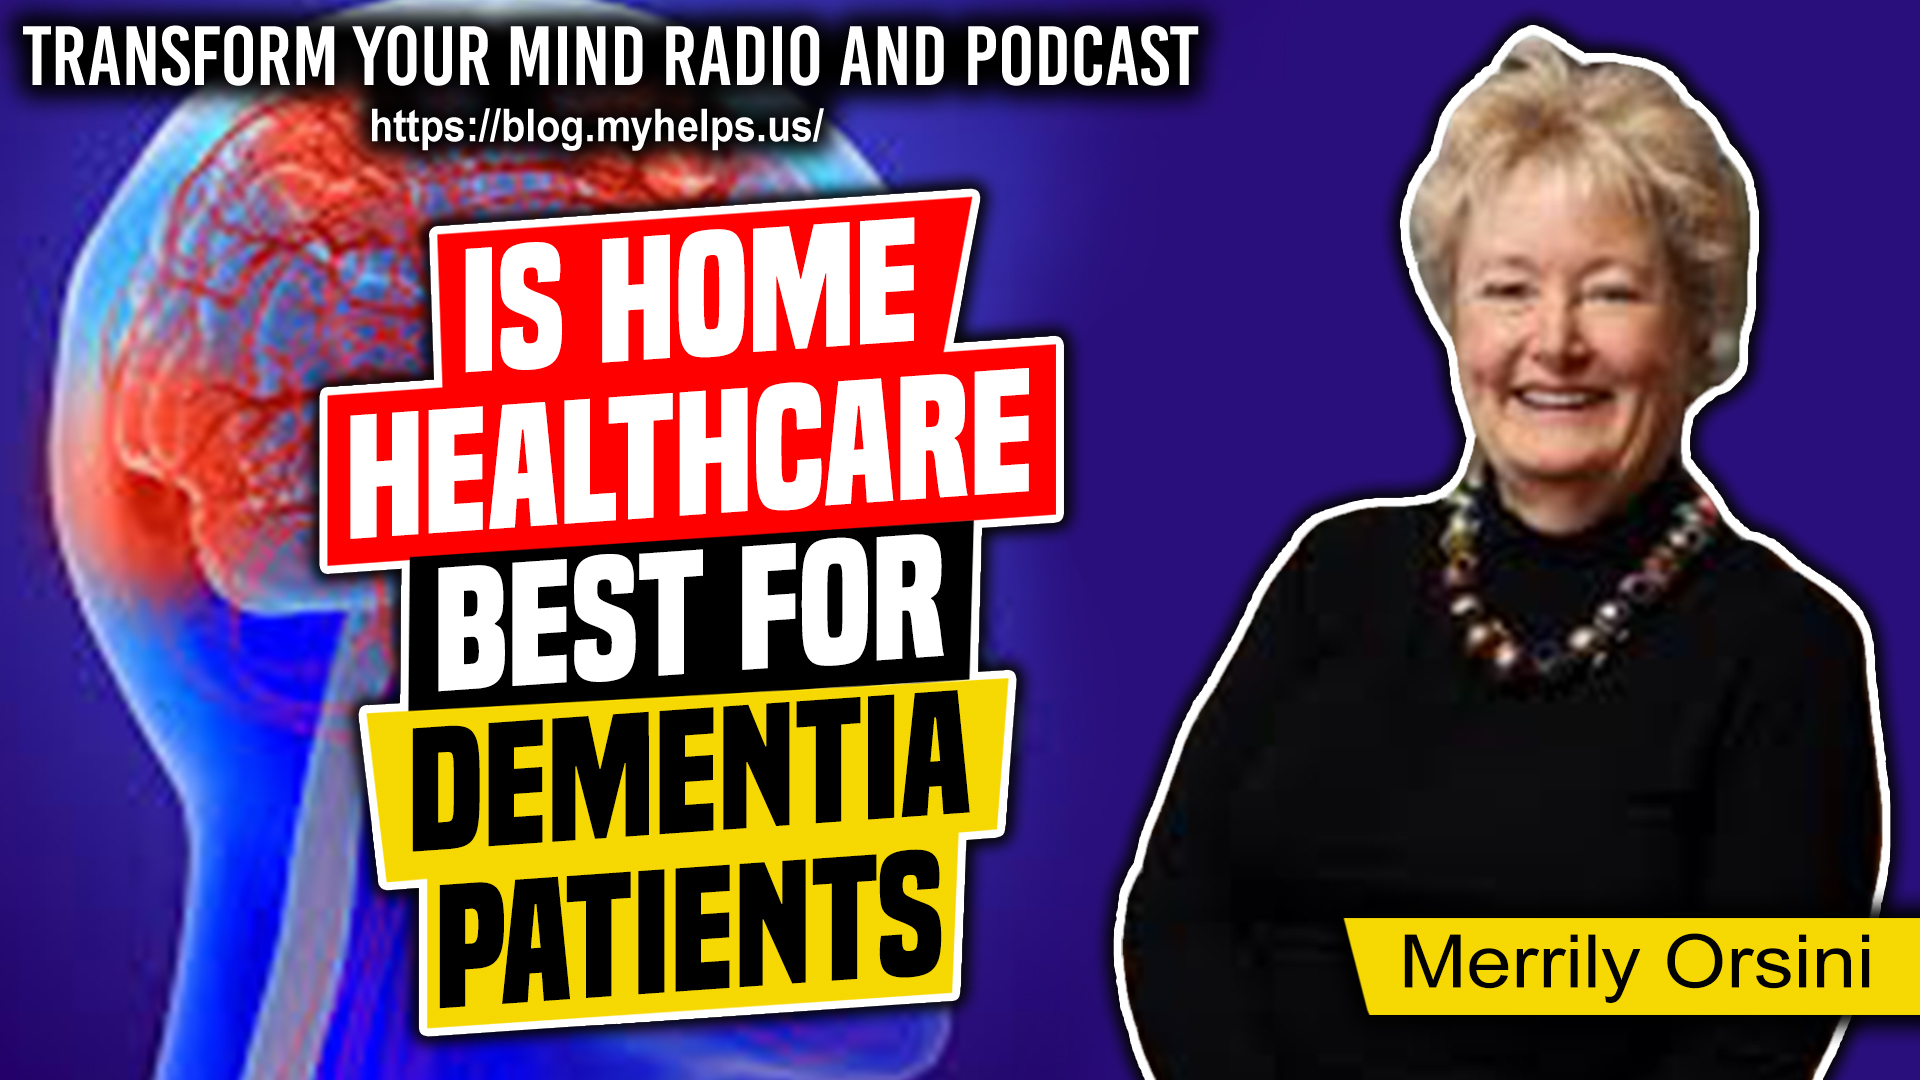 Home health care for Dementia patients